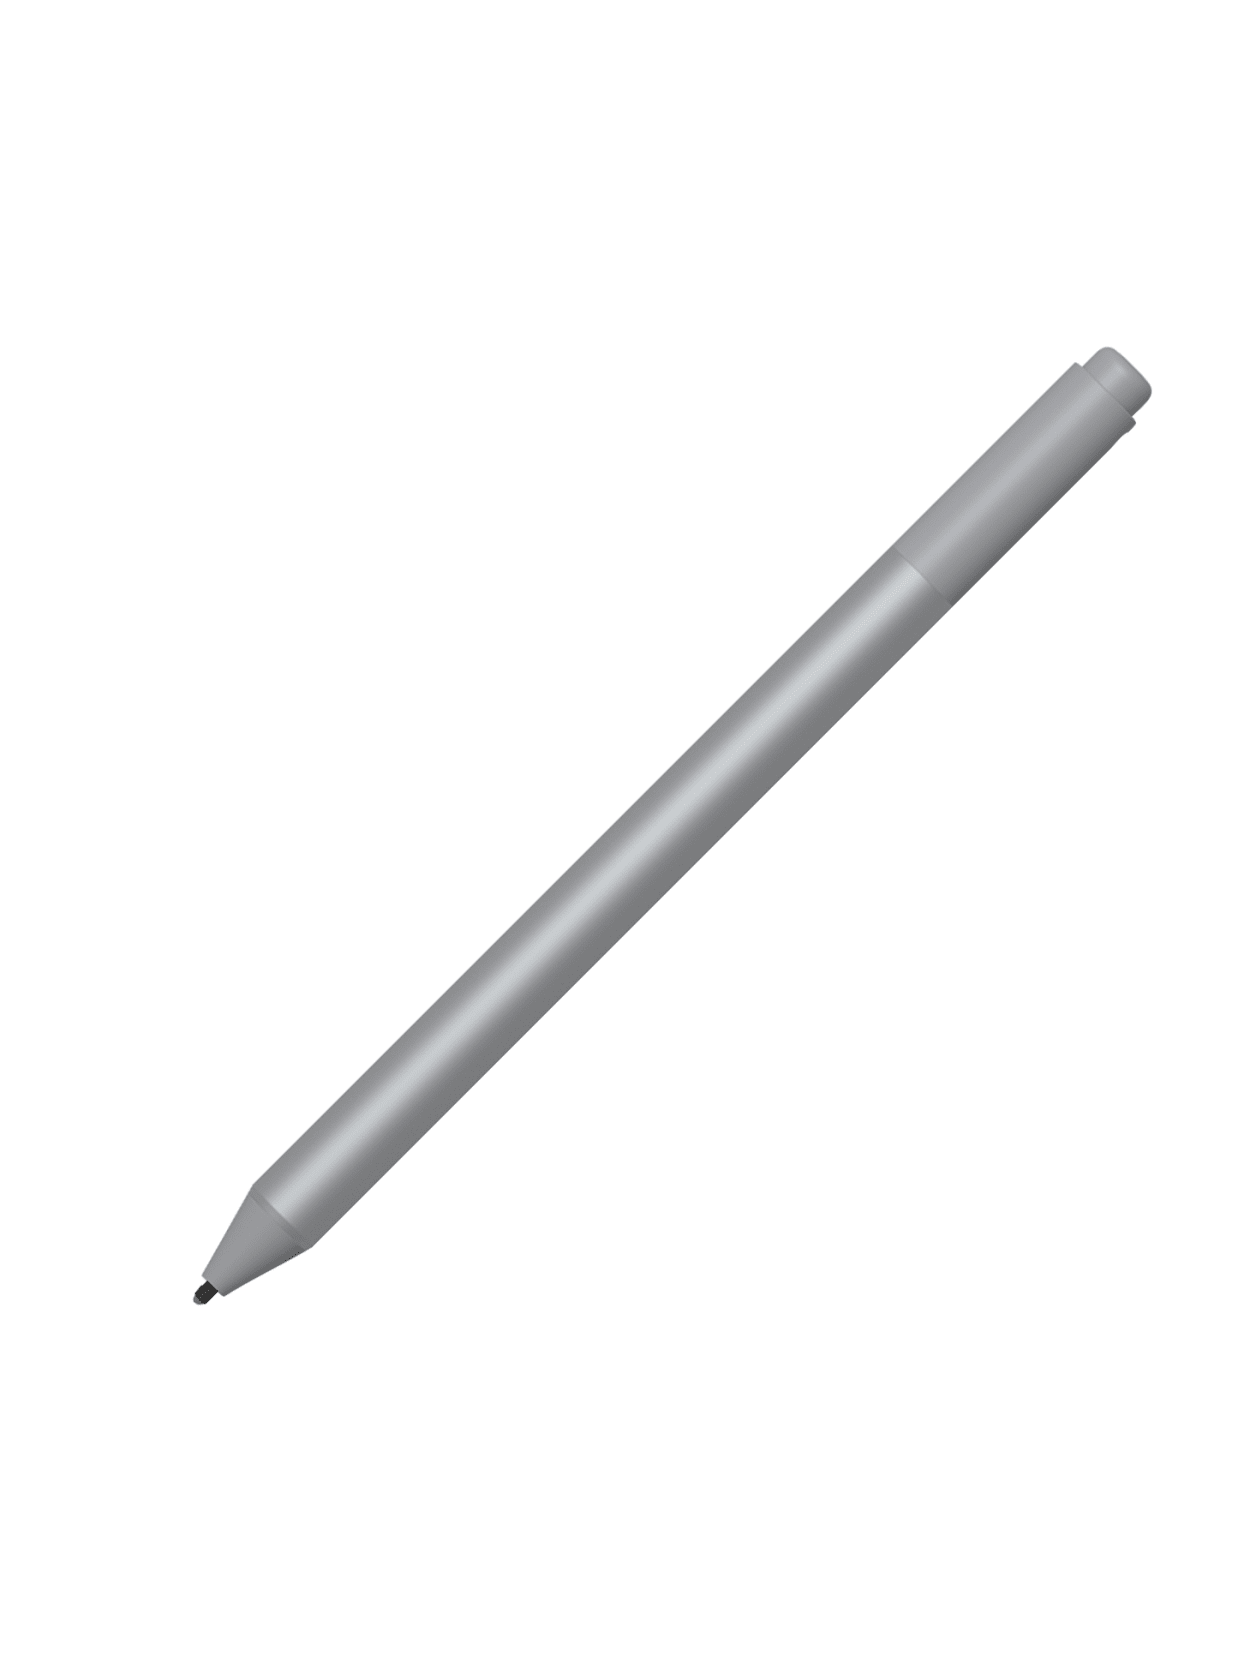 Buy Microsoft Surface Pen | UP TO 60% OFF